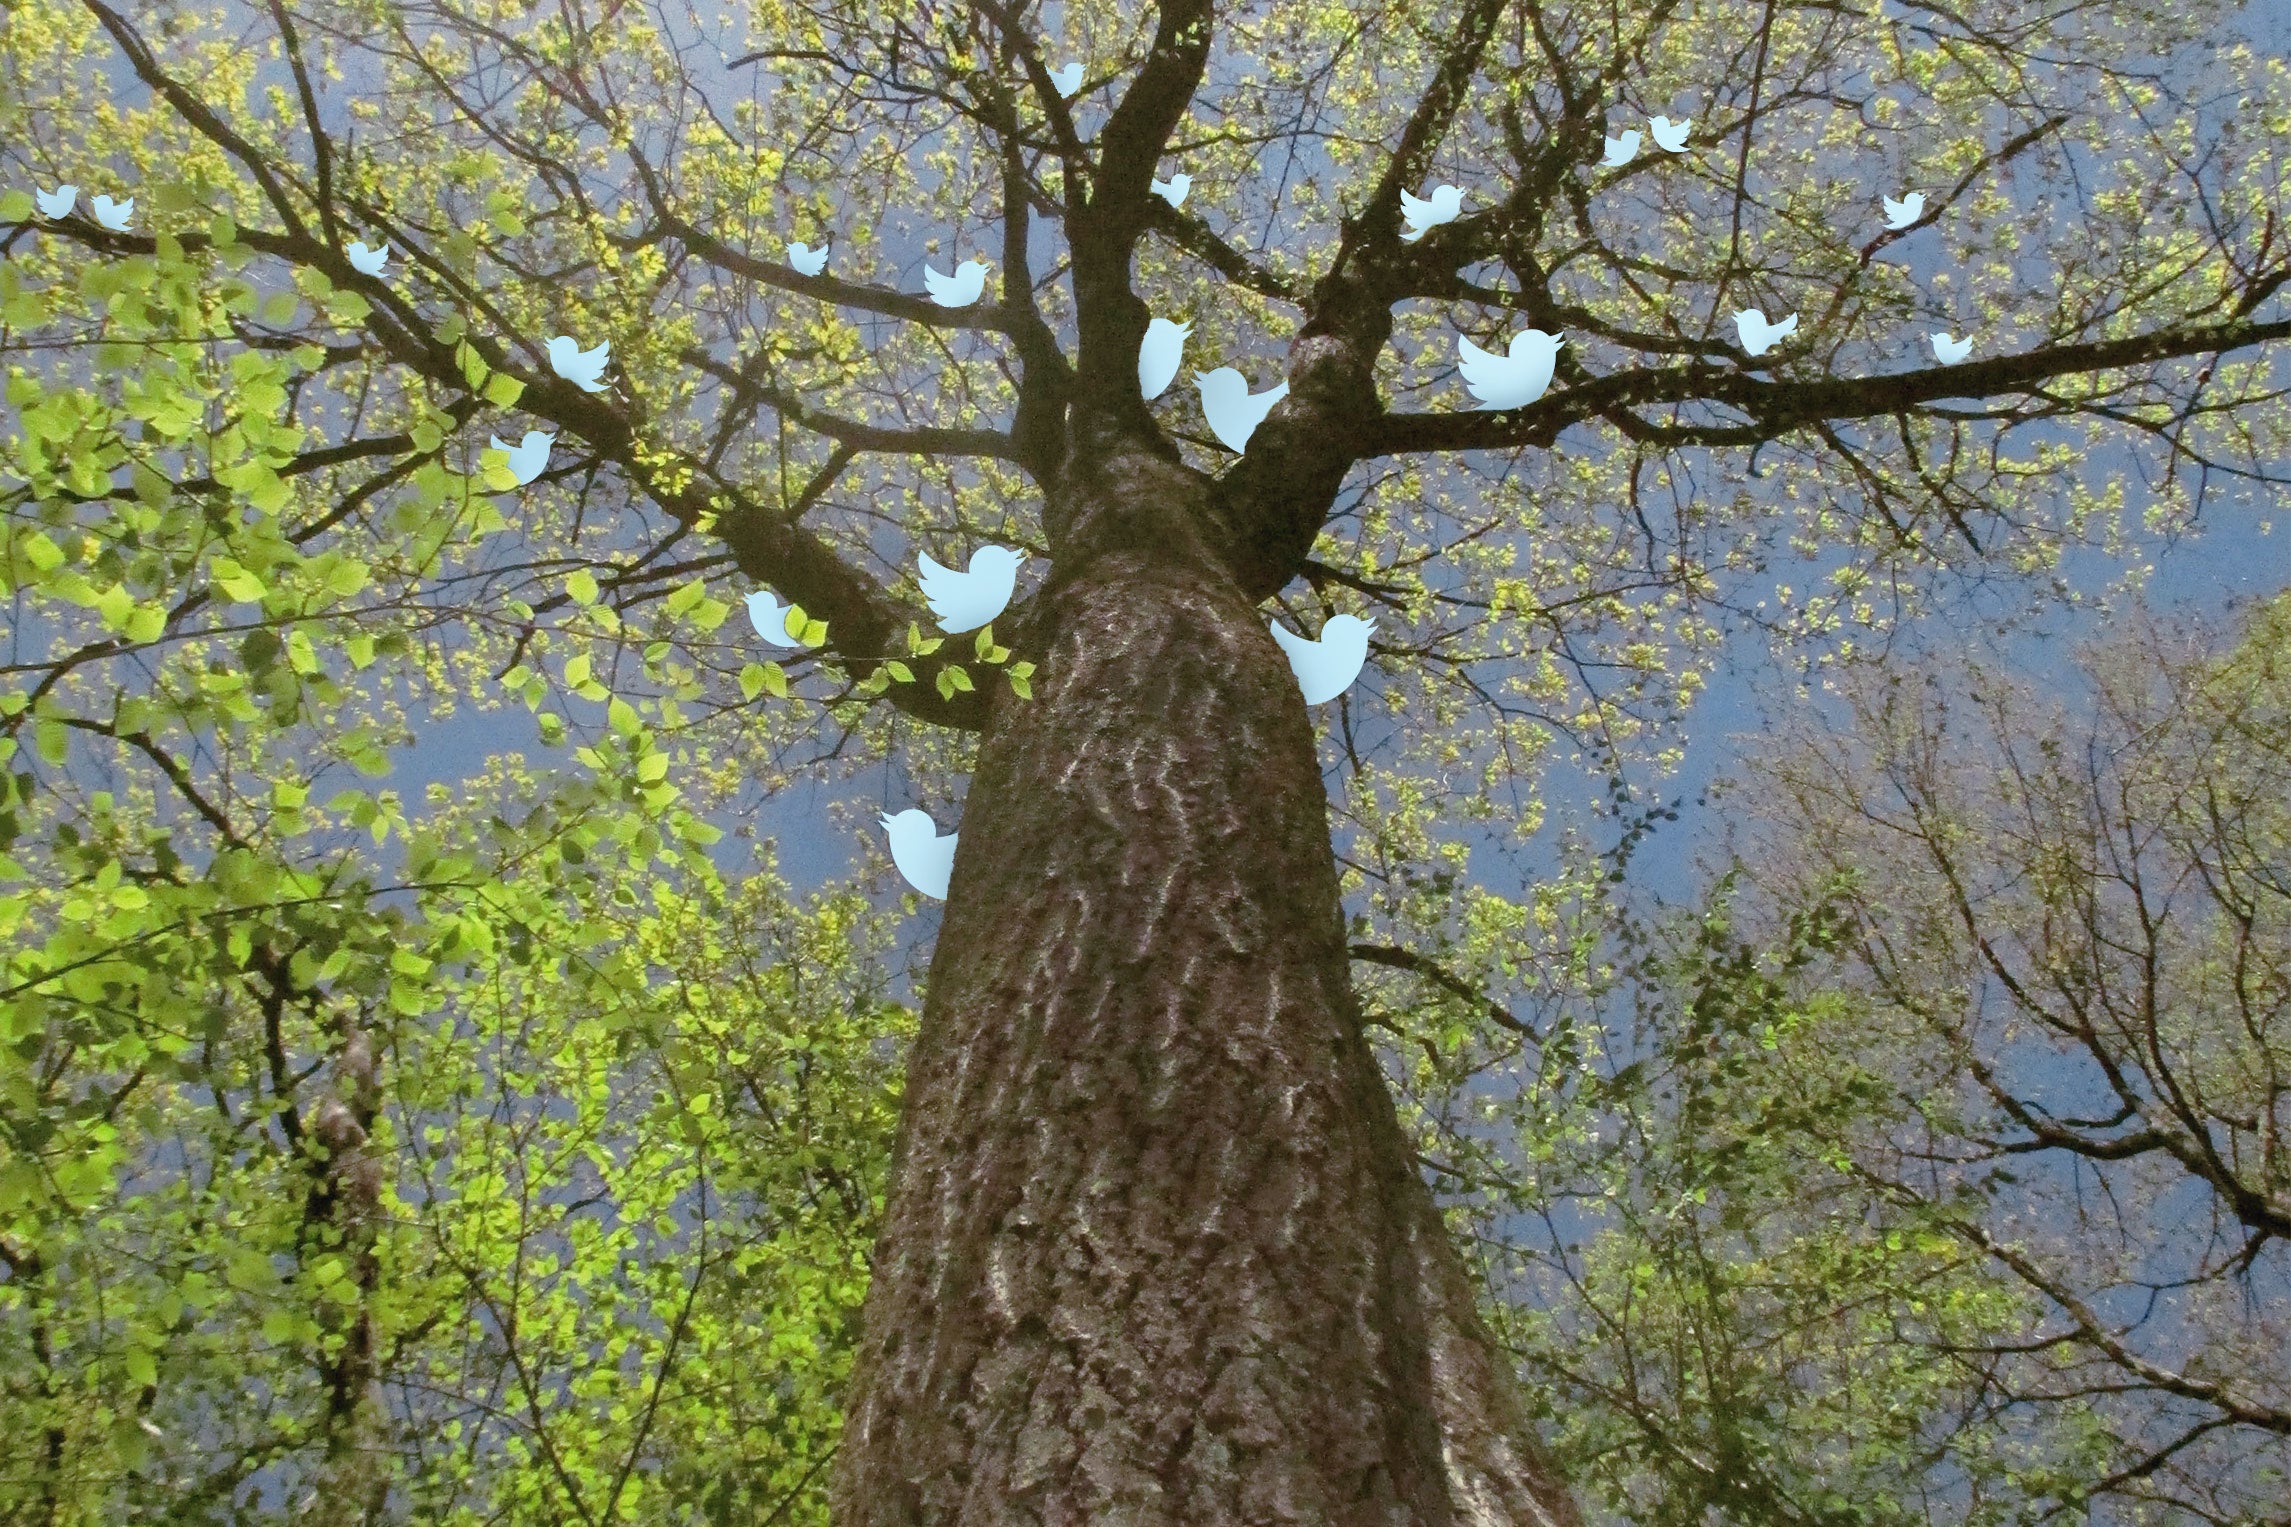 Tree branches with blue birds